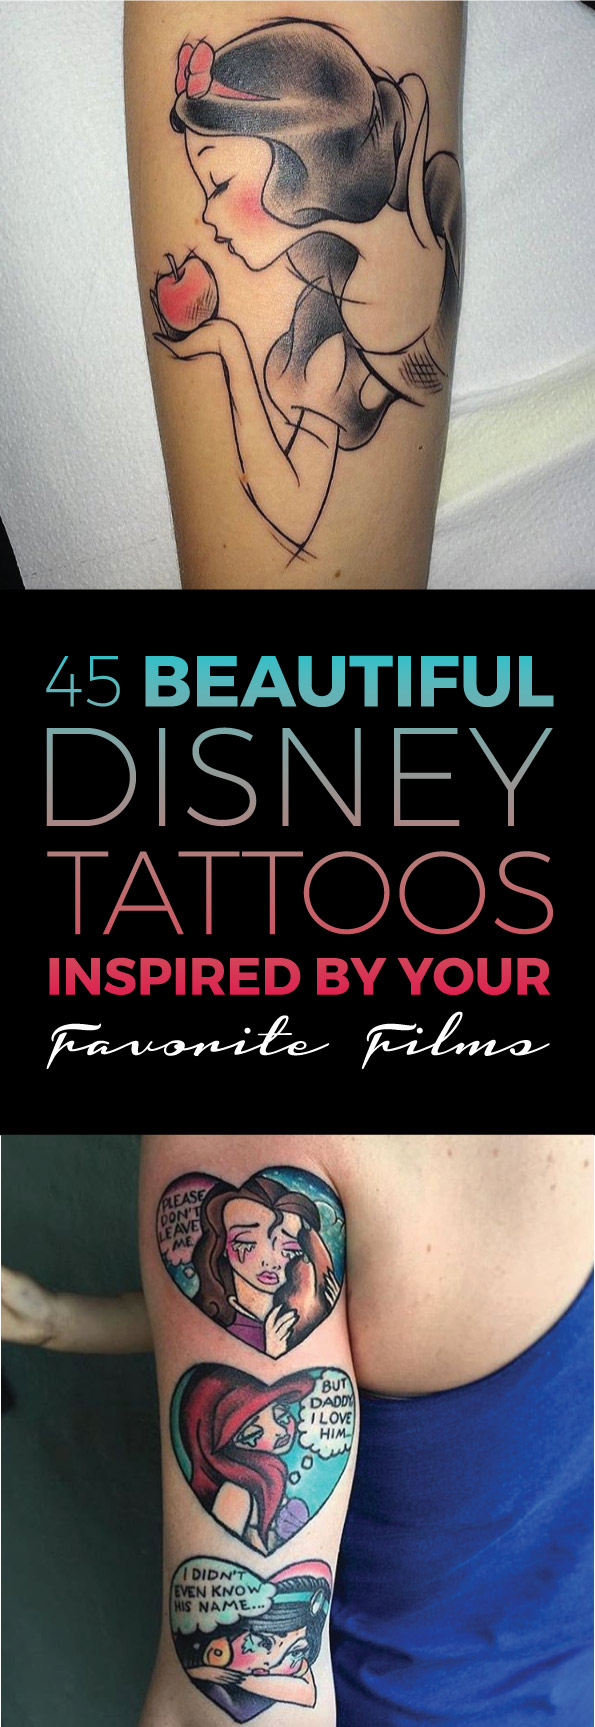 45 Beautiful Disney Tattoos Inspired by Your Favorite Films | TattooBlend